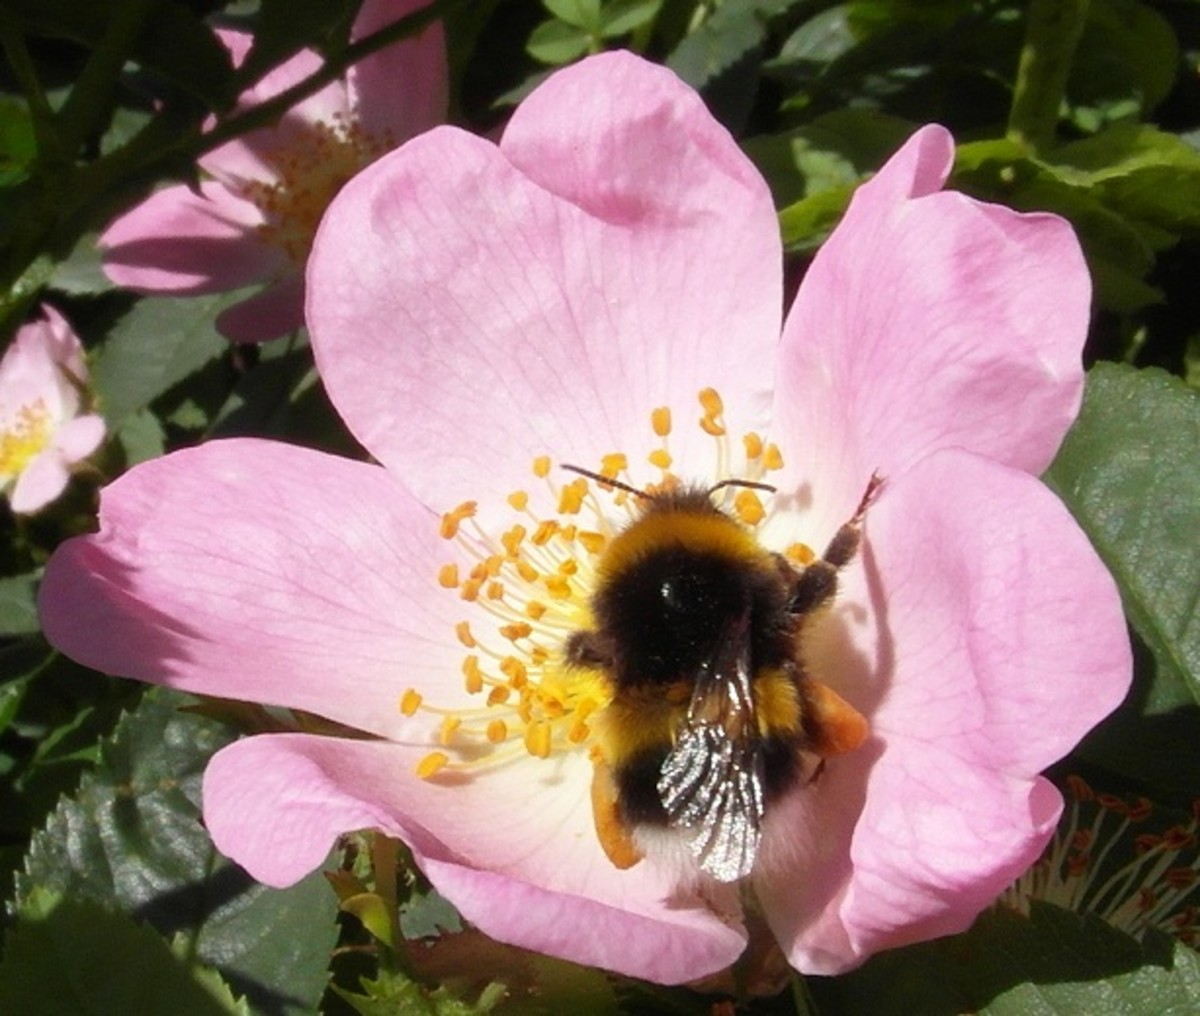 White tailed bumble bee on dog rose